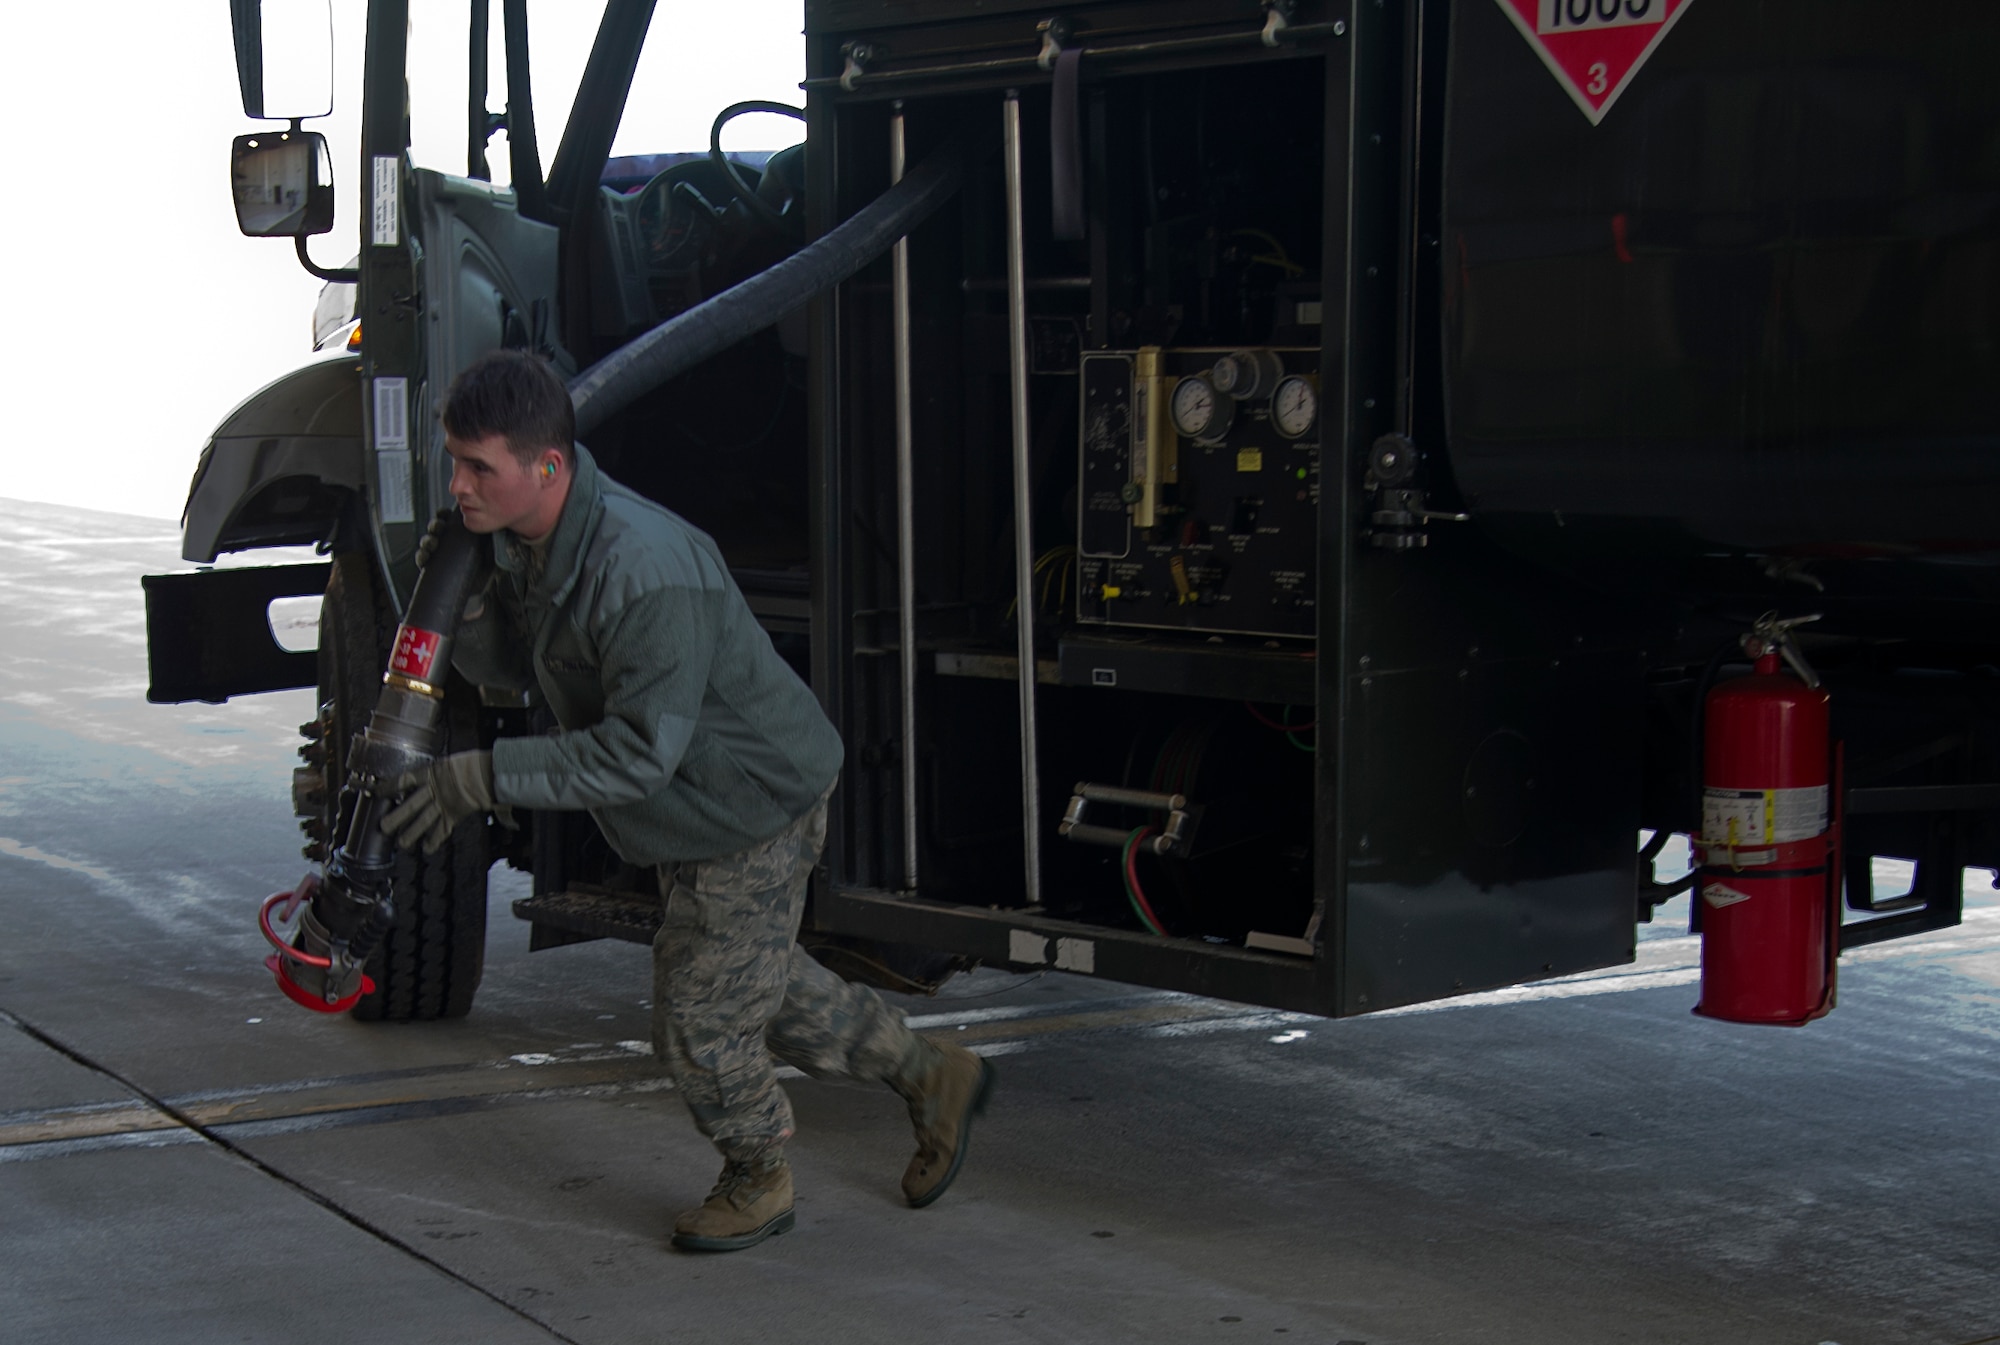 Airman 1st Class Jeremy Miller, 673d Logistics Readiness Squadron fuels apprentice, unrolls the fueling hose of the R-11 fuel truck on Joint Base Elmendorf-Richardson April 3, 2012. The fueling is a transaction between Miller and the crew chief who actually signs for the fuel. (U.S. Air Force photo/Staff Sgt. Zachary Wolf)